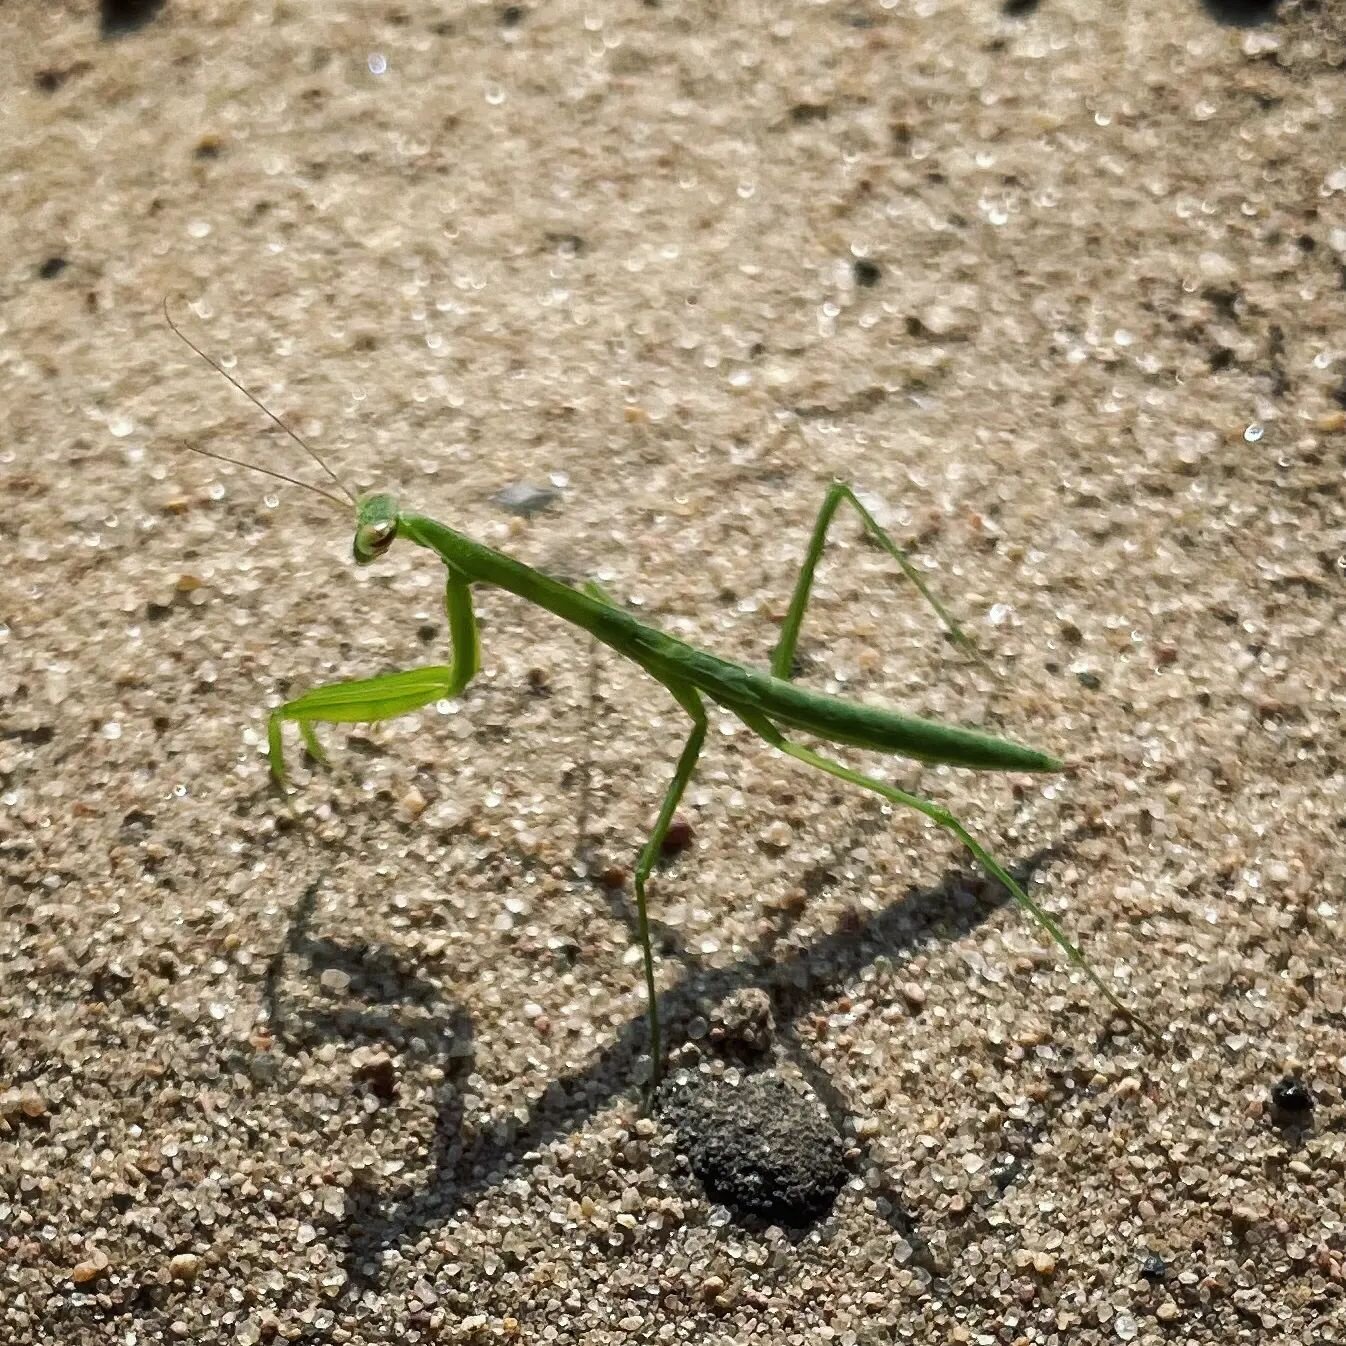 Hello Friend!!!! We love finding Praying Mantis in/near our gardens. Below are a few tips if you're wanting to attract and care for these very beneficial insects in your yard/garden. 
&quot;One of the easiest things to do to encourage praying mantis 